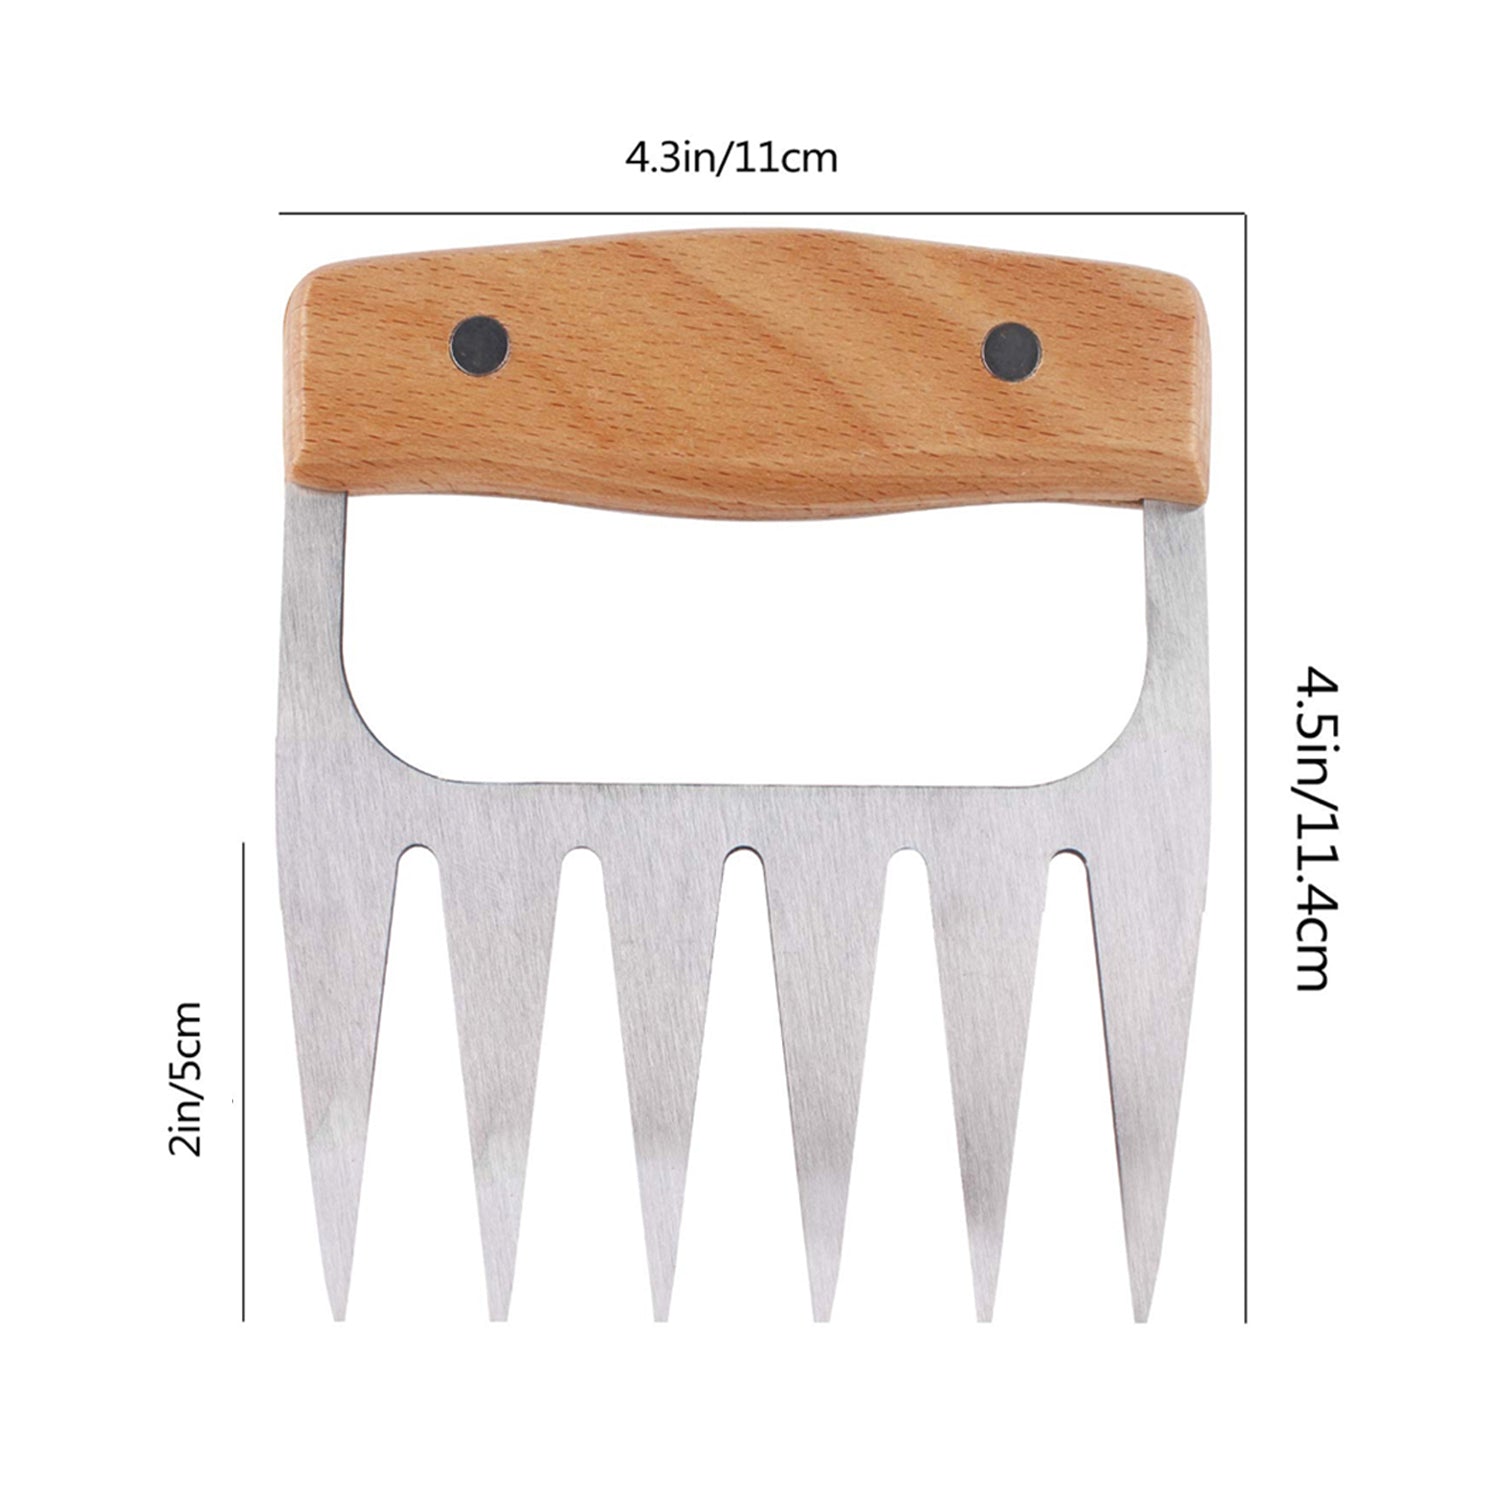 Stainless Steel Meat-Shredding Claws With Wooden Handle